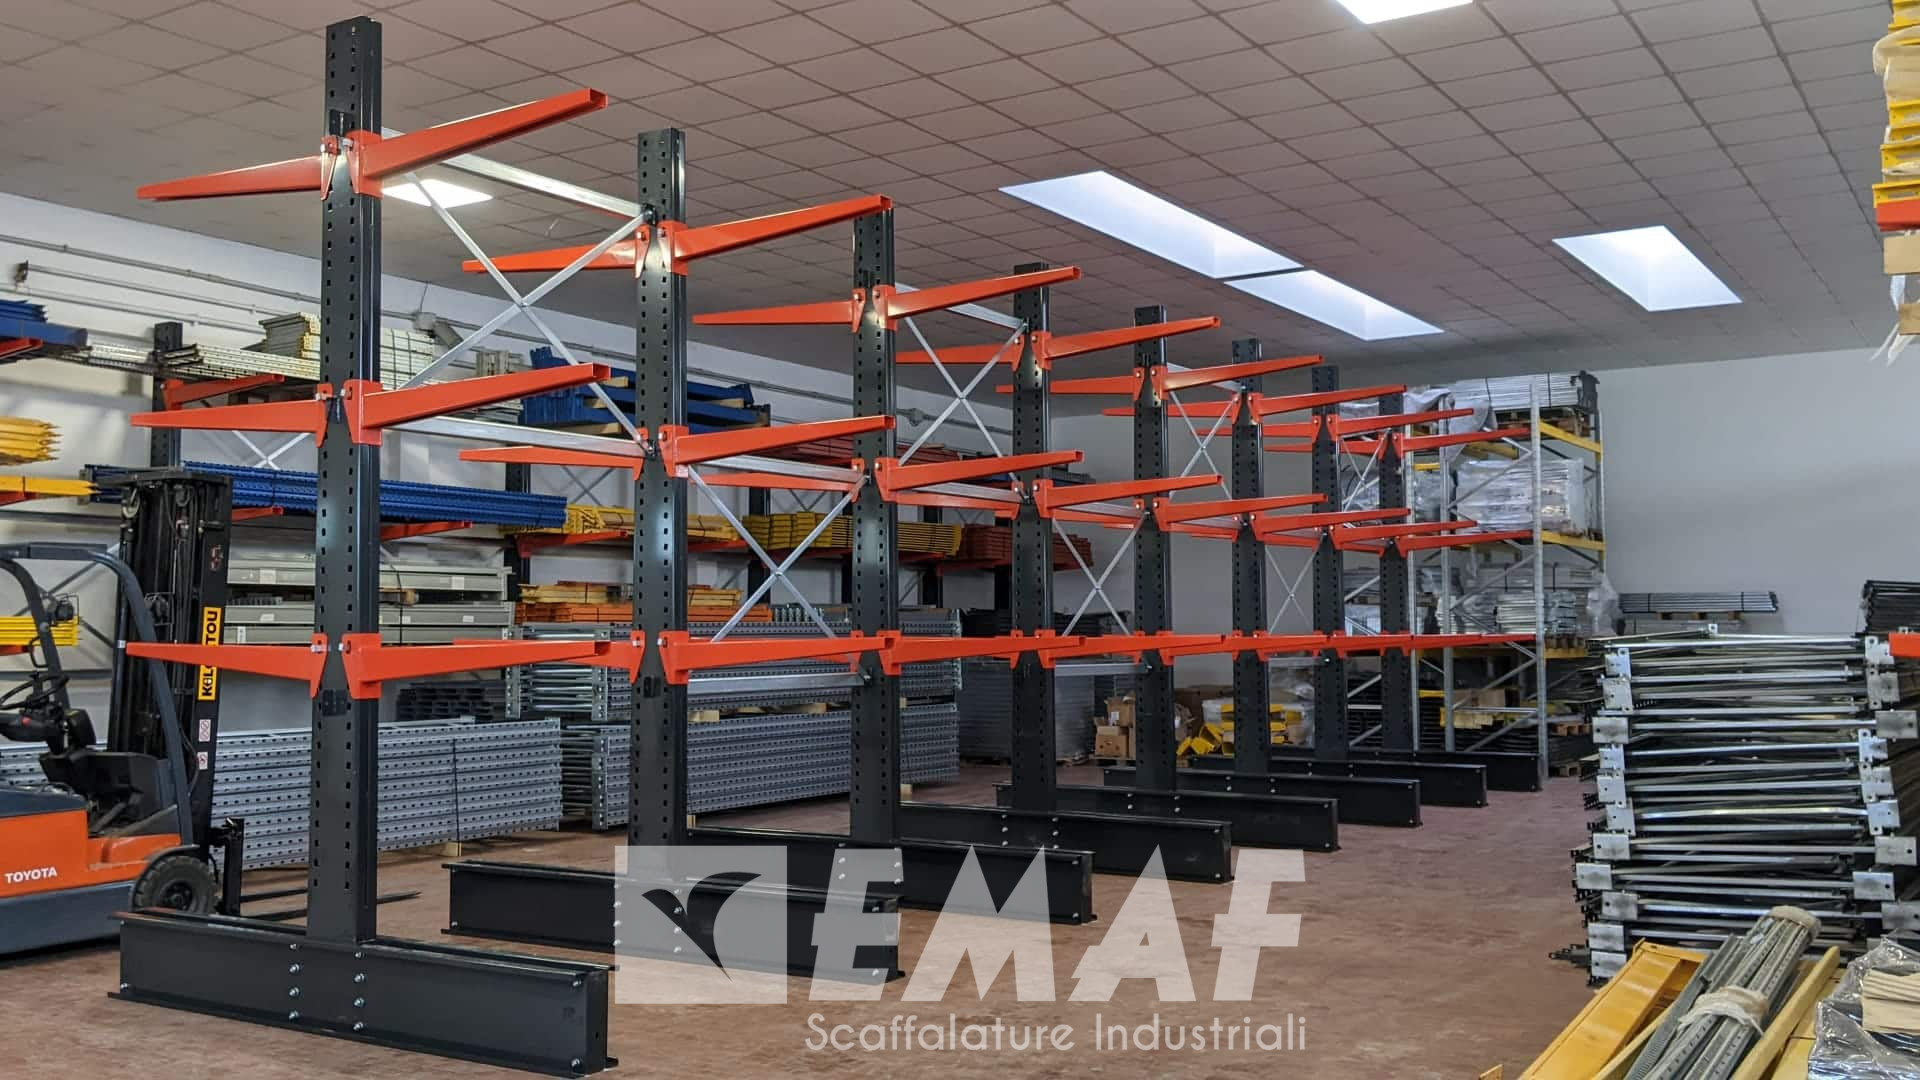 Featured image for “EMAF cantilever to store shelving”